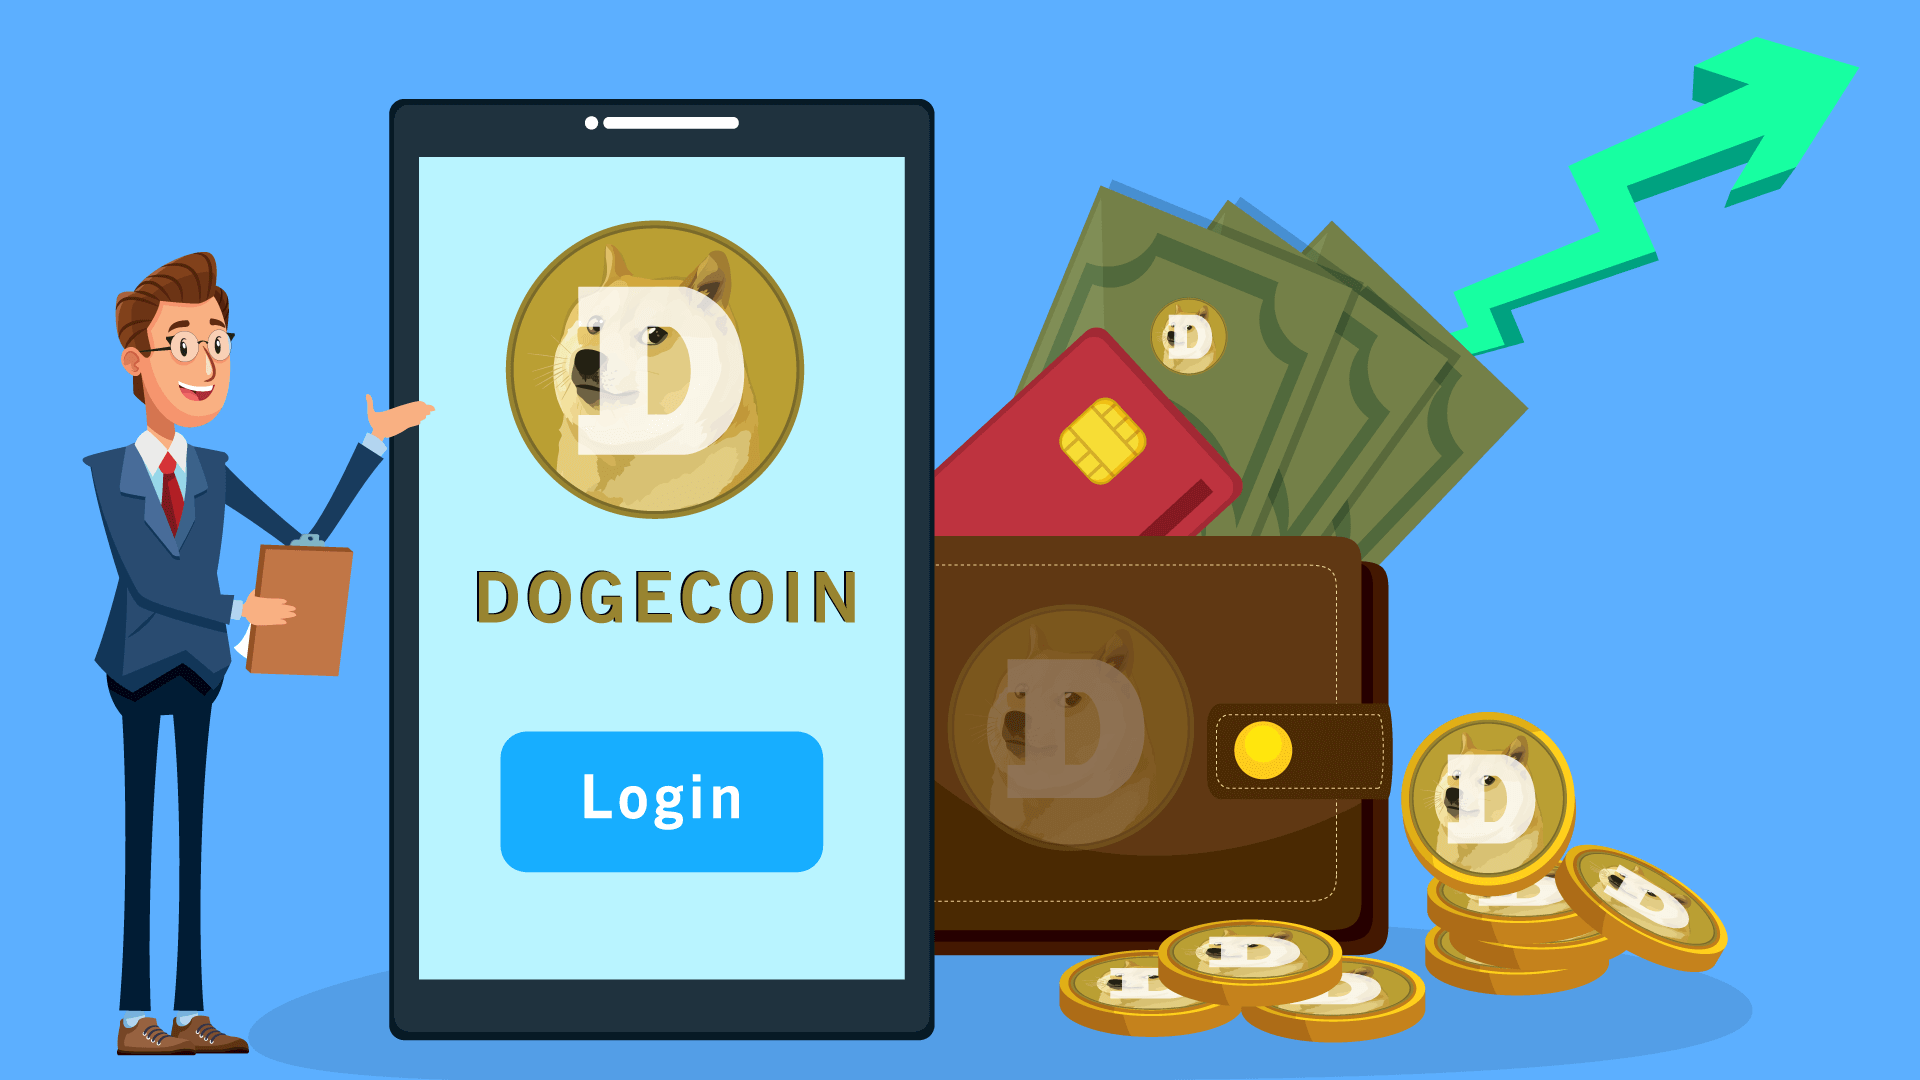 Doge 2020 Dogecoin Price Prediction And Analysis In April 2020